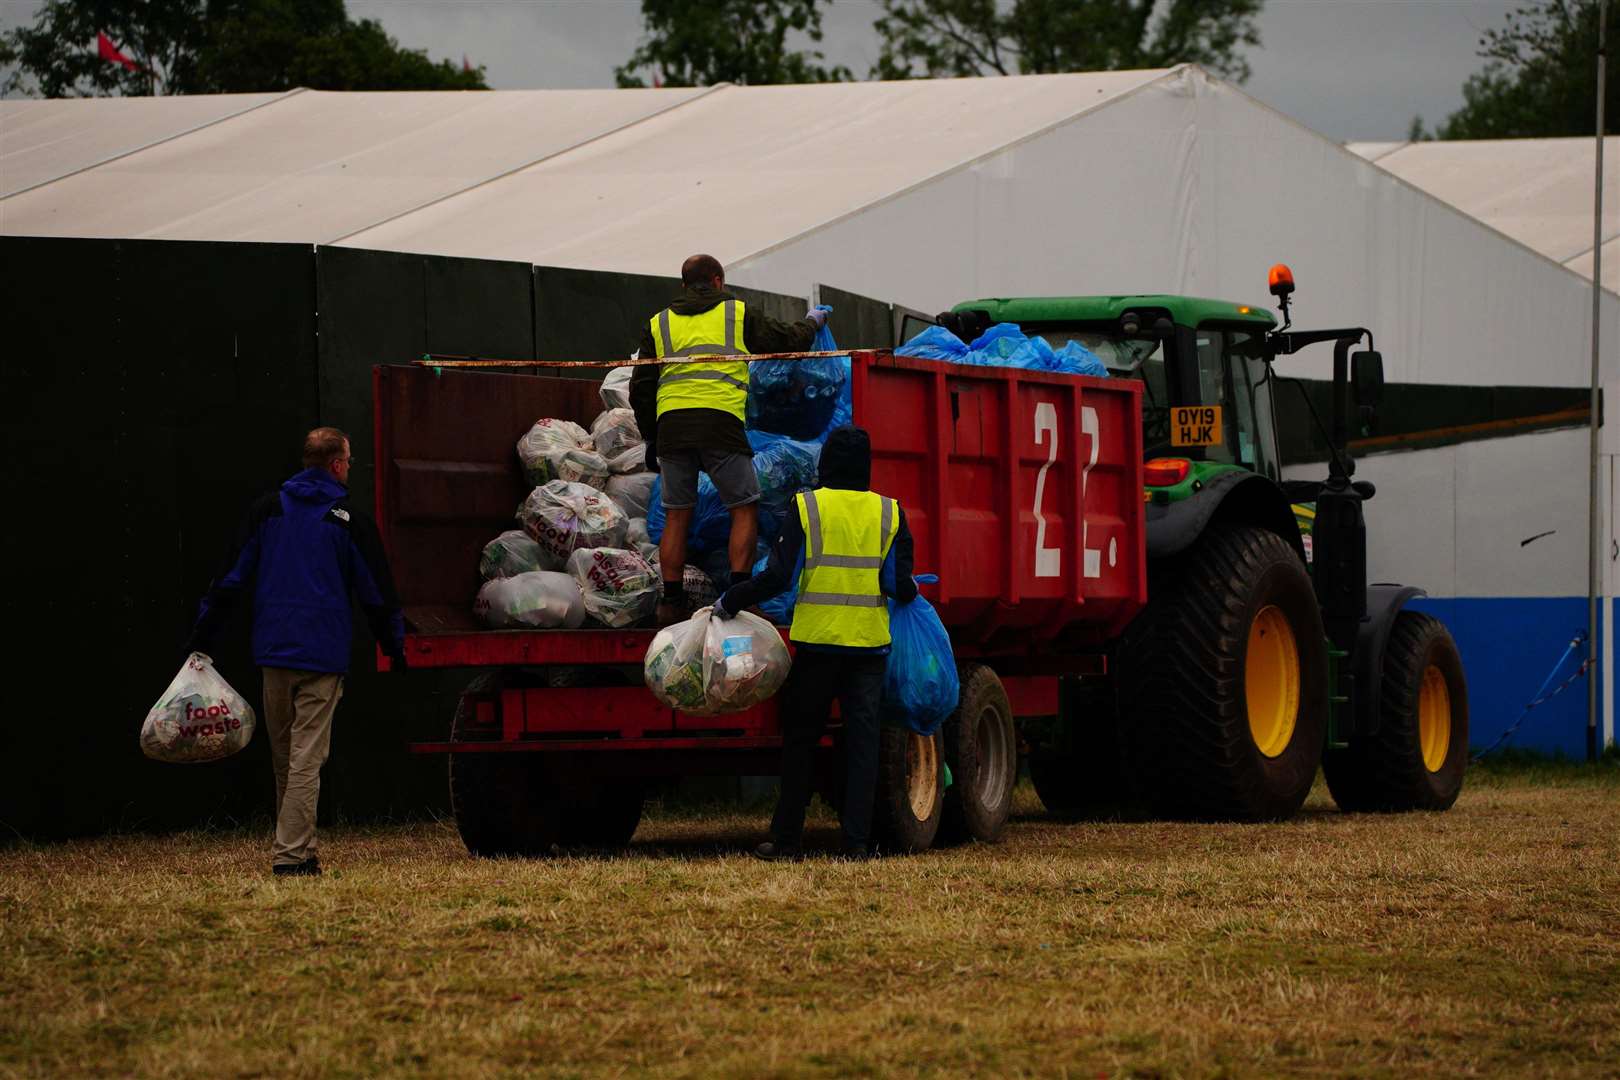 Workers load waste bags on a trailer pulled by a tractor (Ben Birchall/PA)